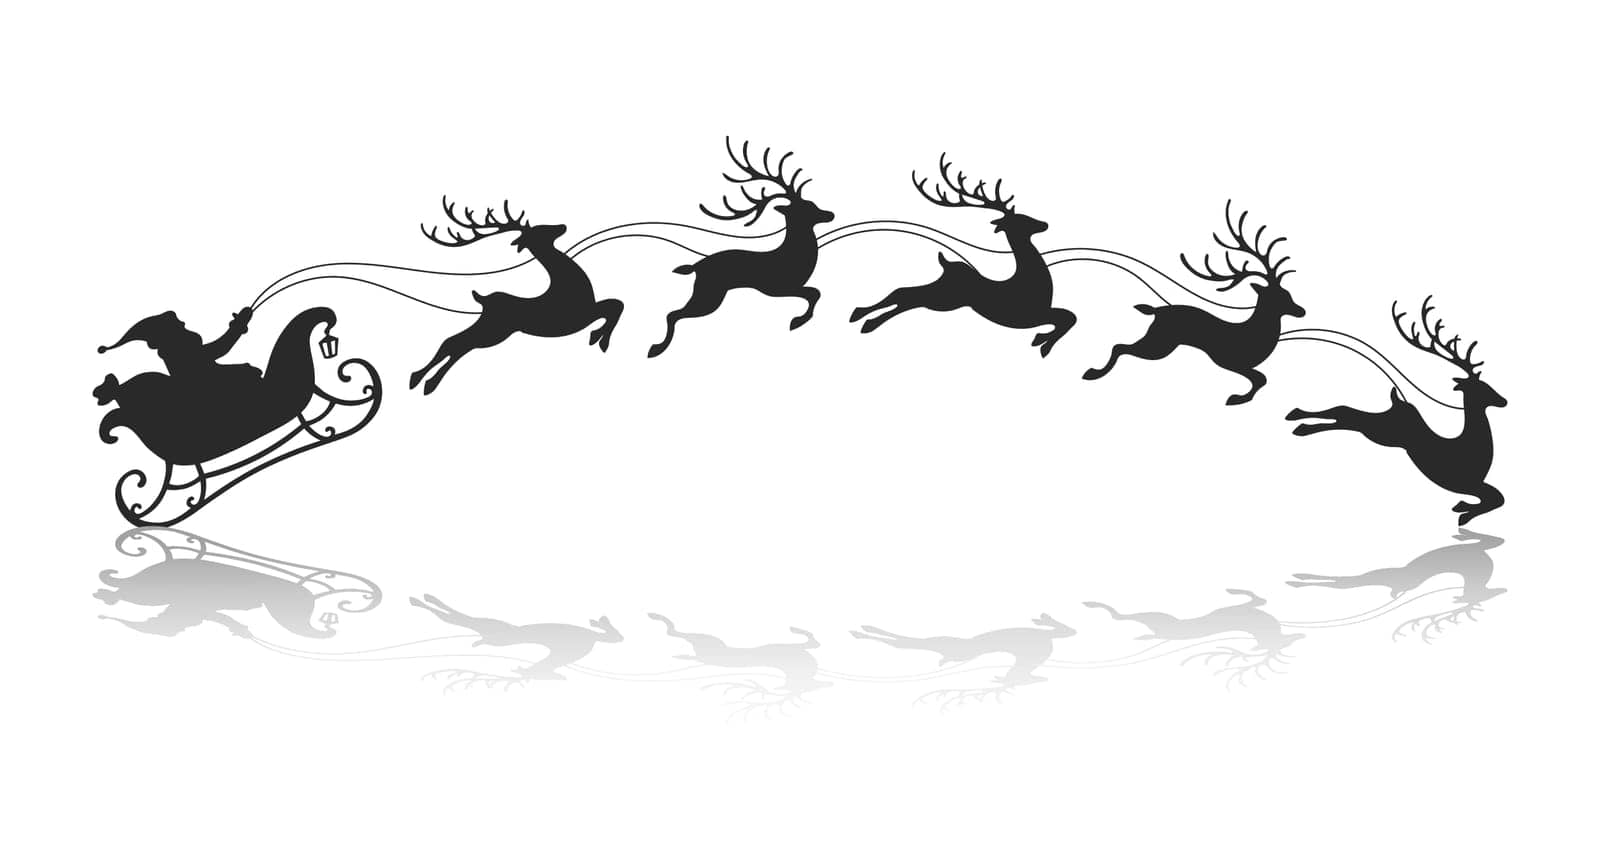 Santa on a sleigh with reindeers, silhouette with reflection on a white background. Winter illustration, vector